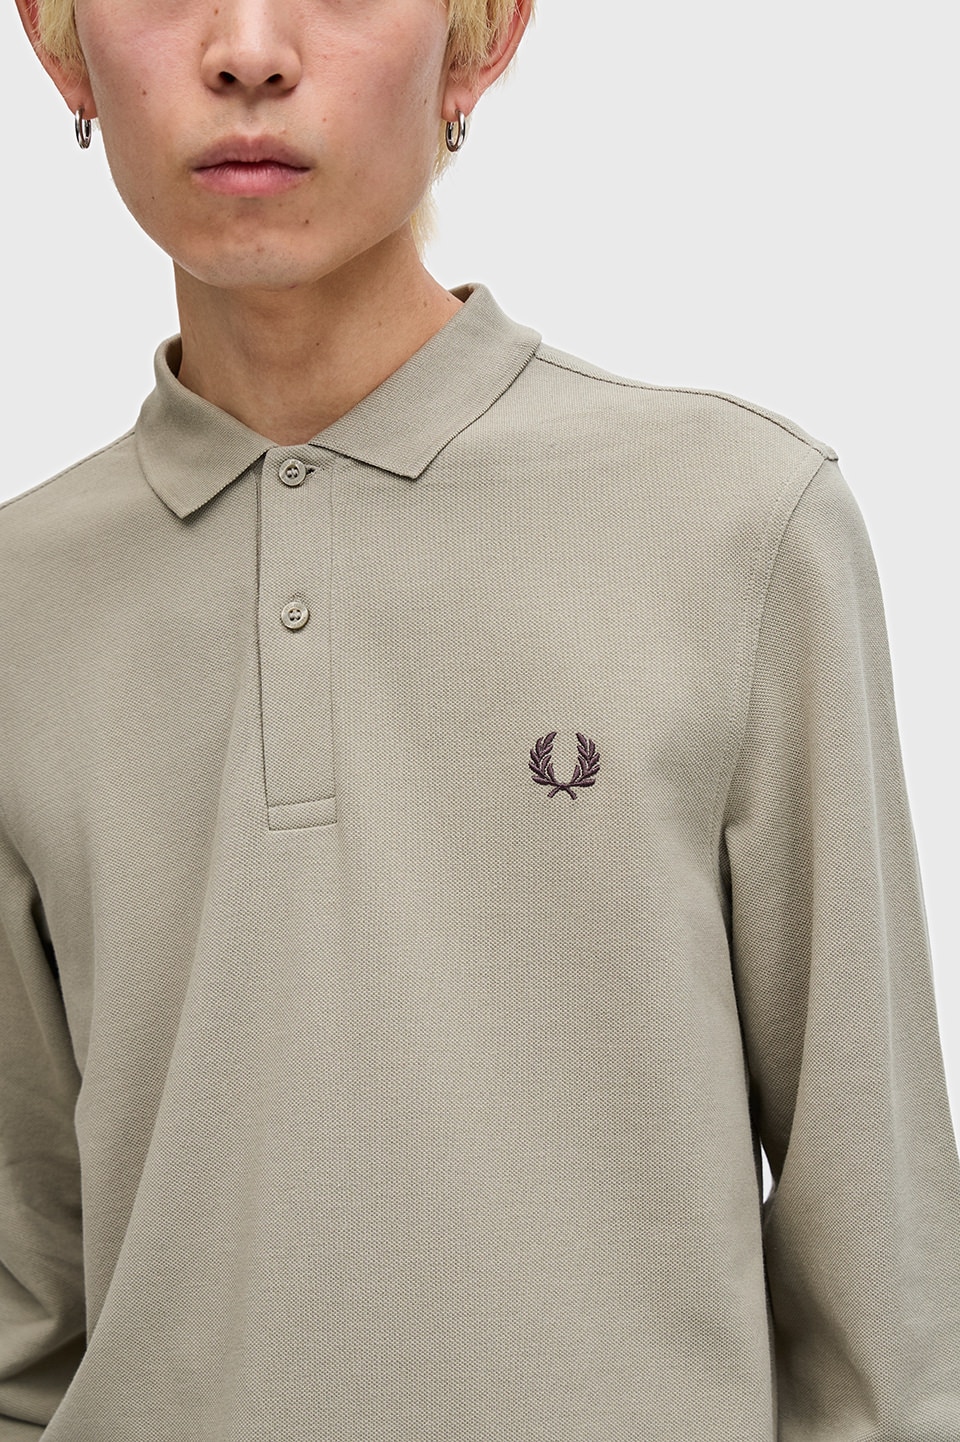 The Fred Perry Shirt - M6006|FRED PERRY(フレッドペリー)の通販 